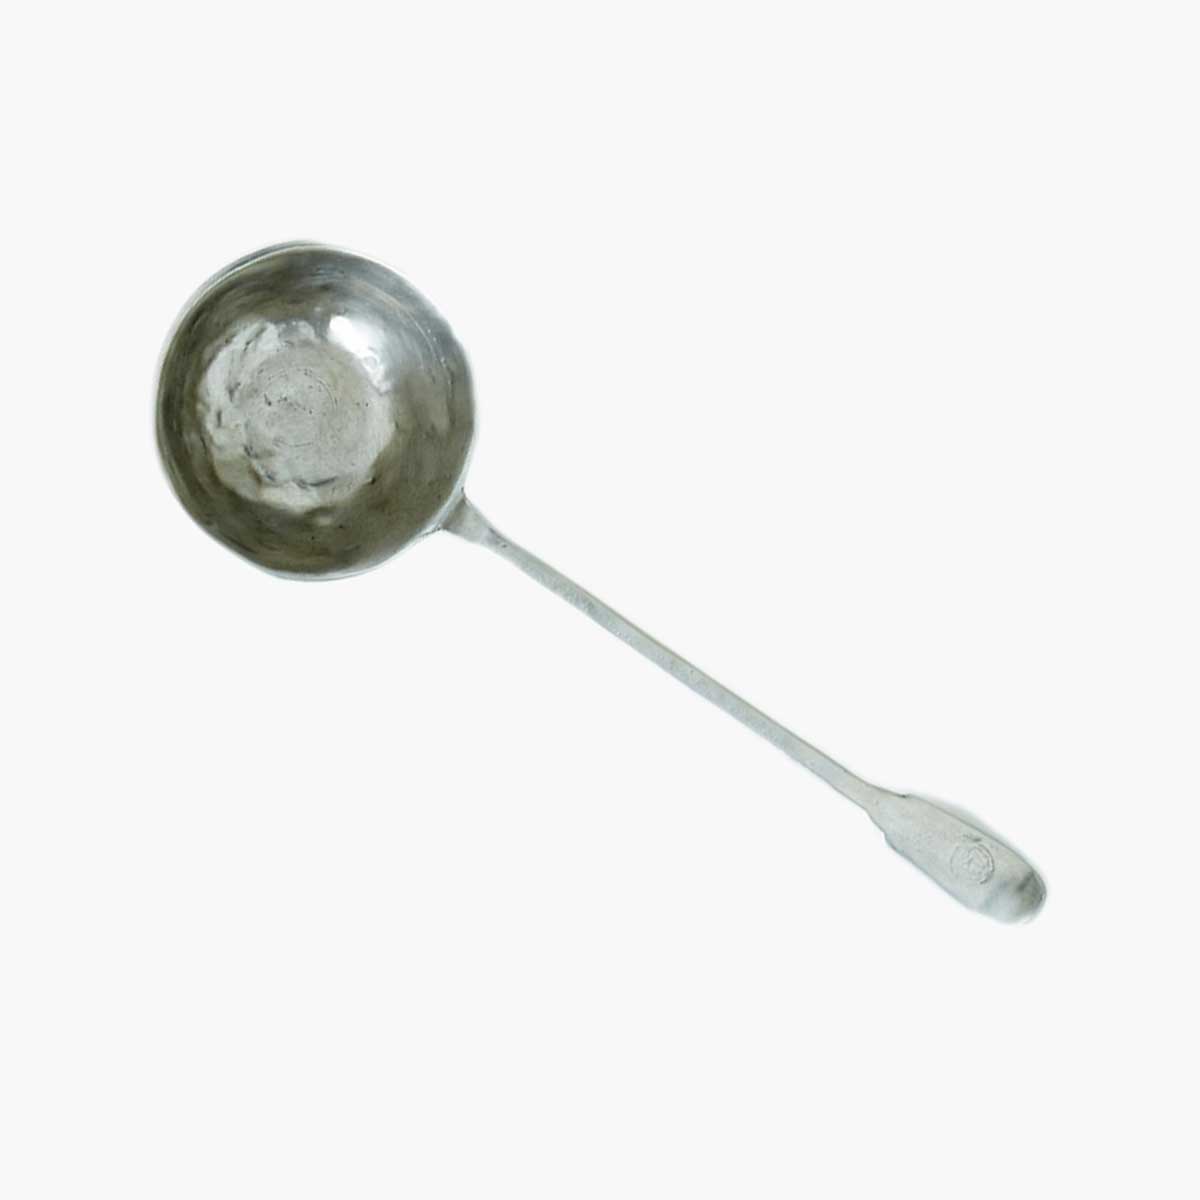 A pewter ladle, which is one of the pasta queen's favorite things.